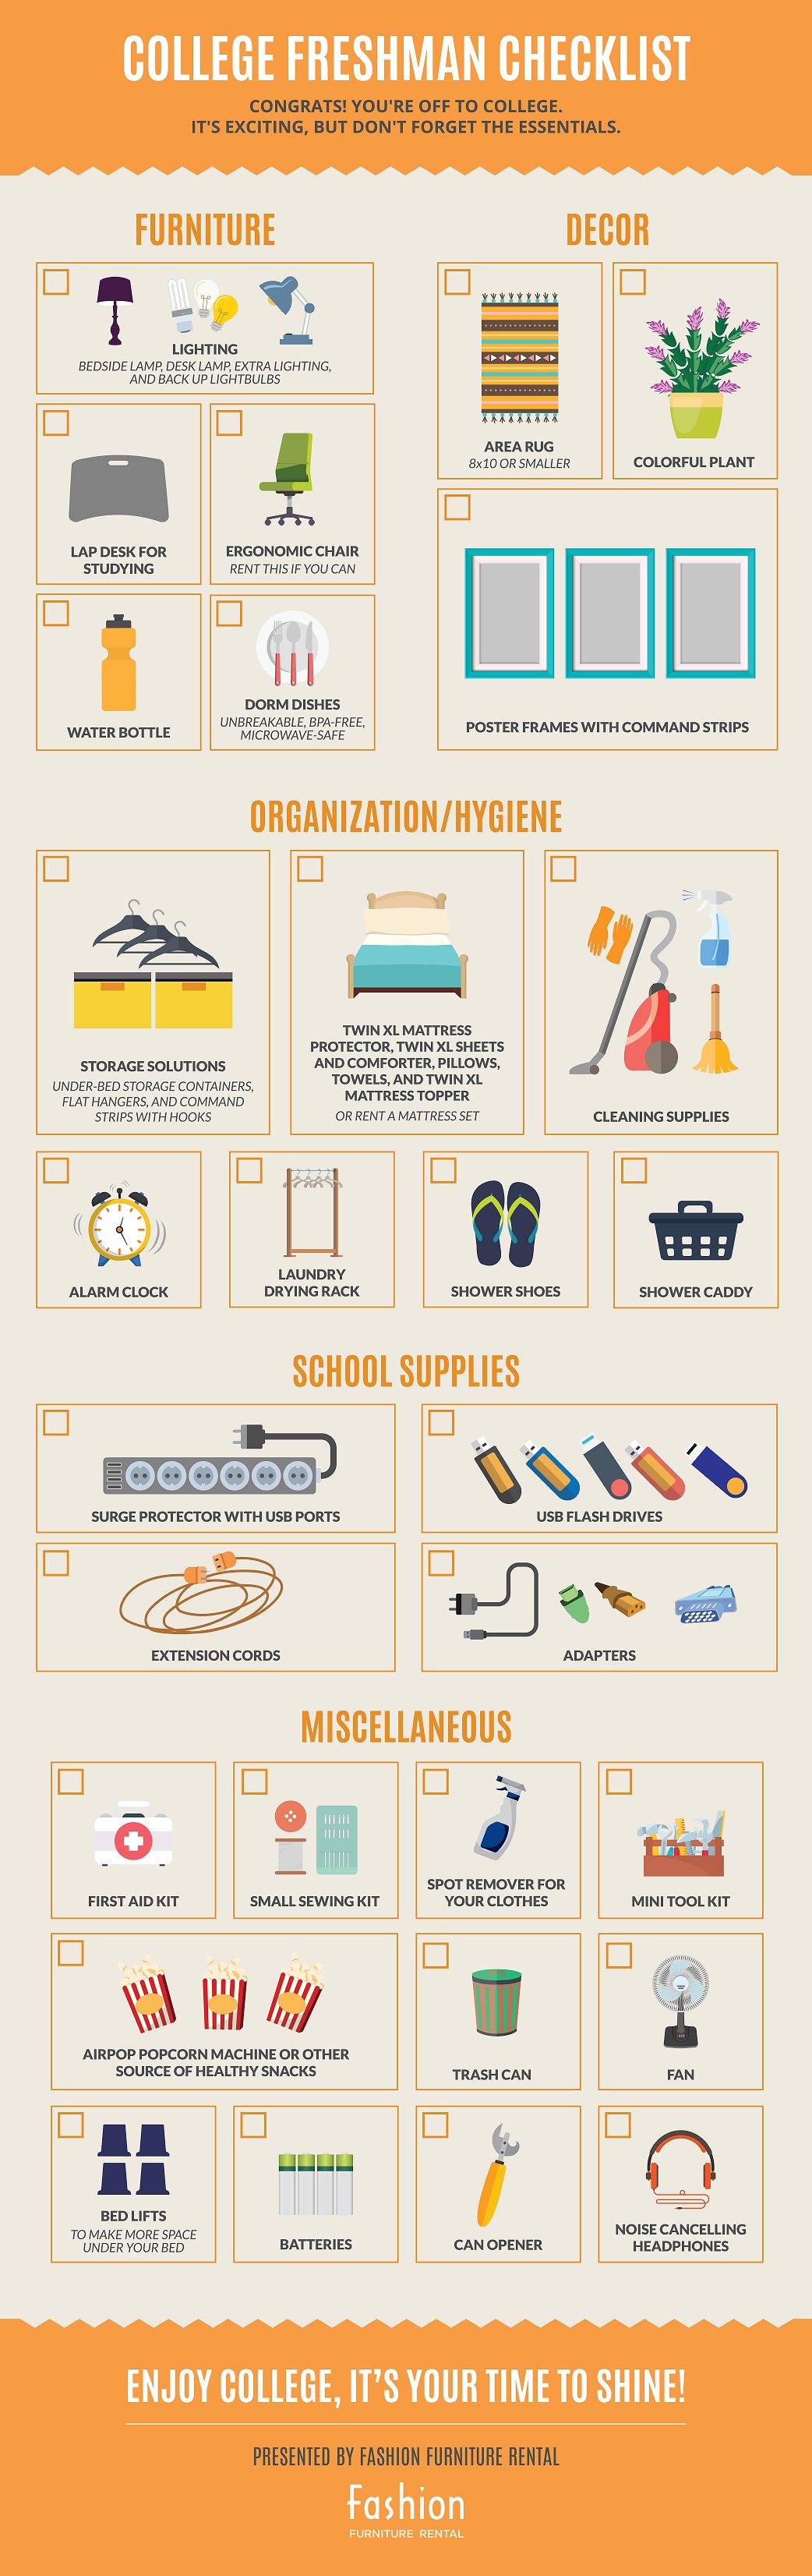 The 10 Things to Make Sure You Bring to College